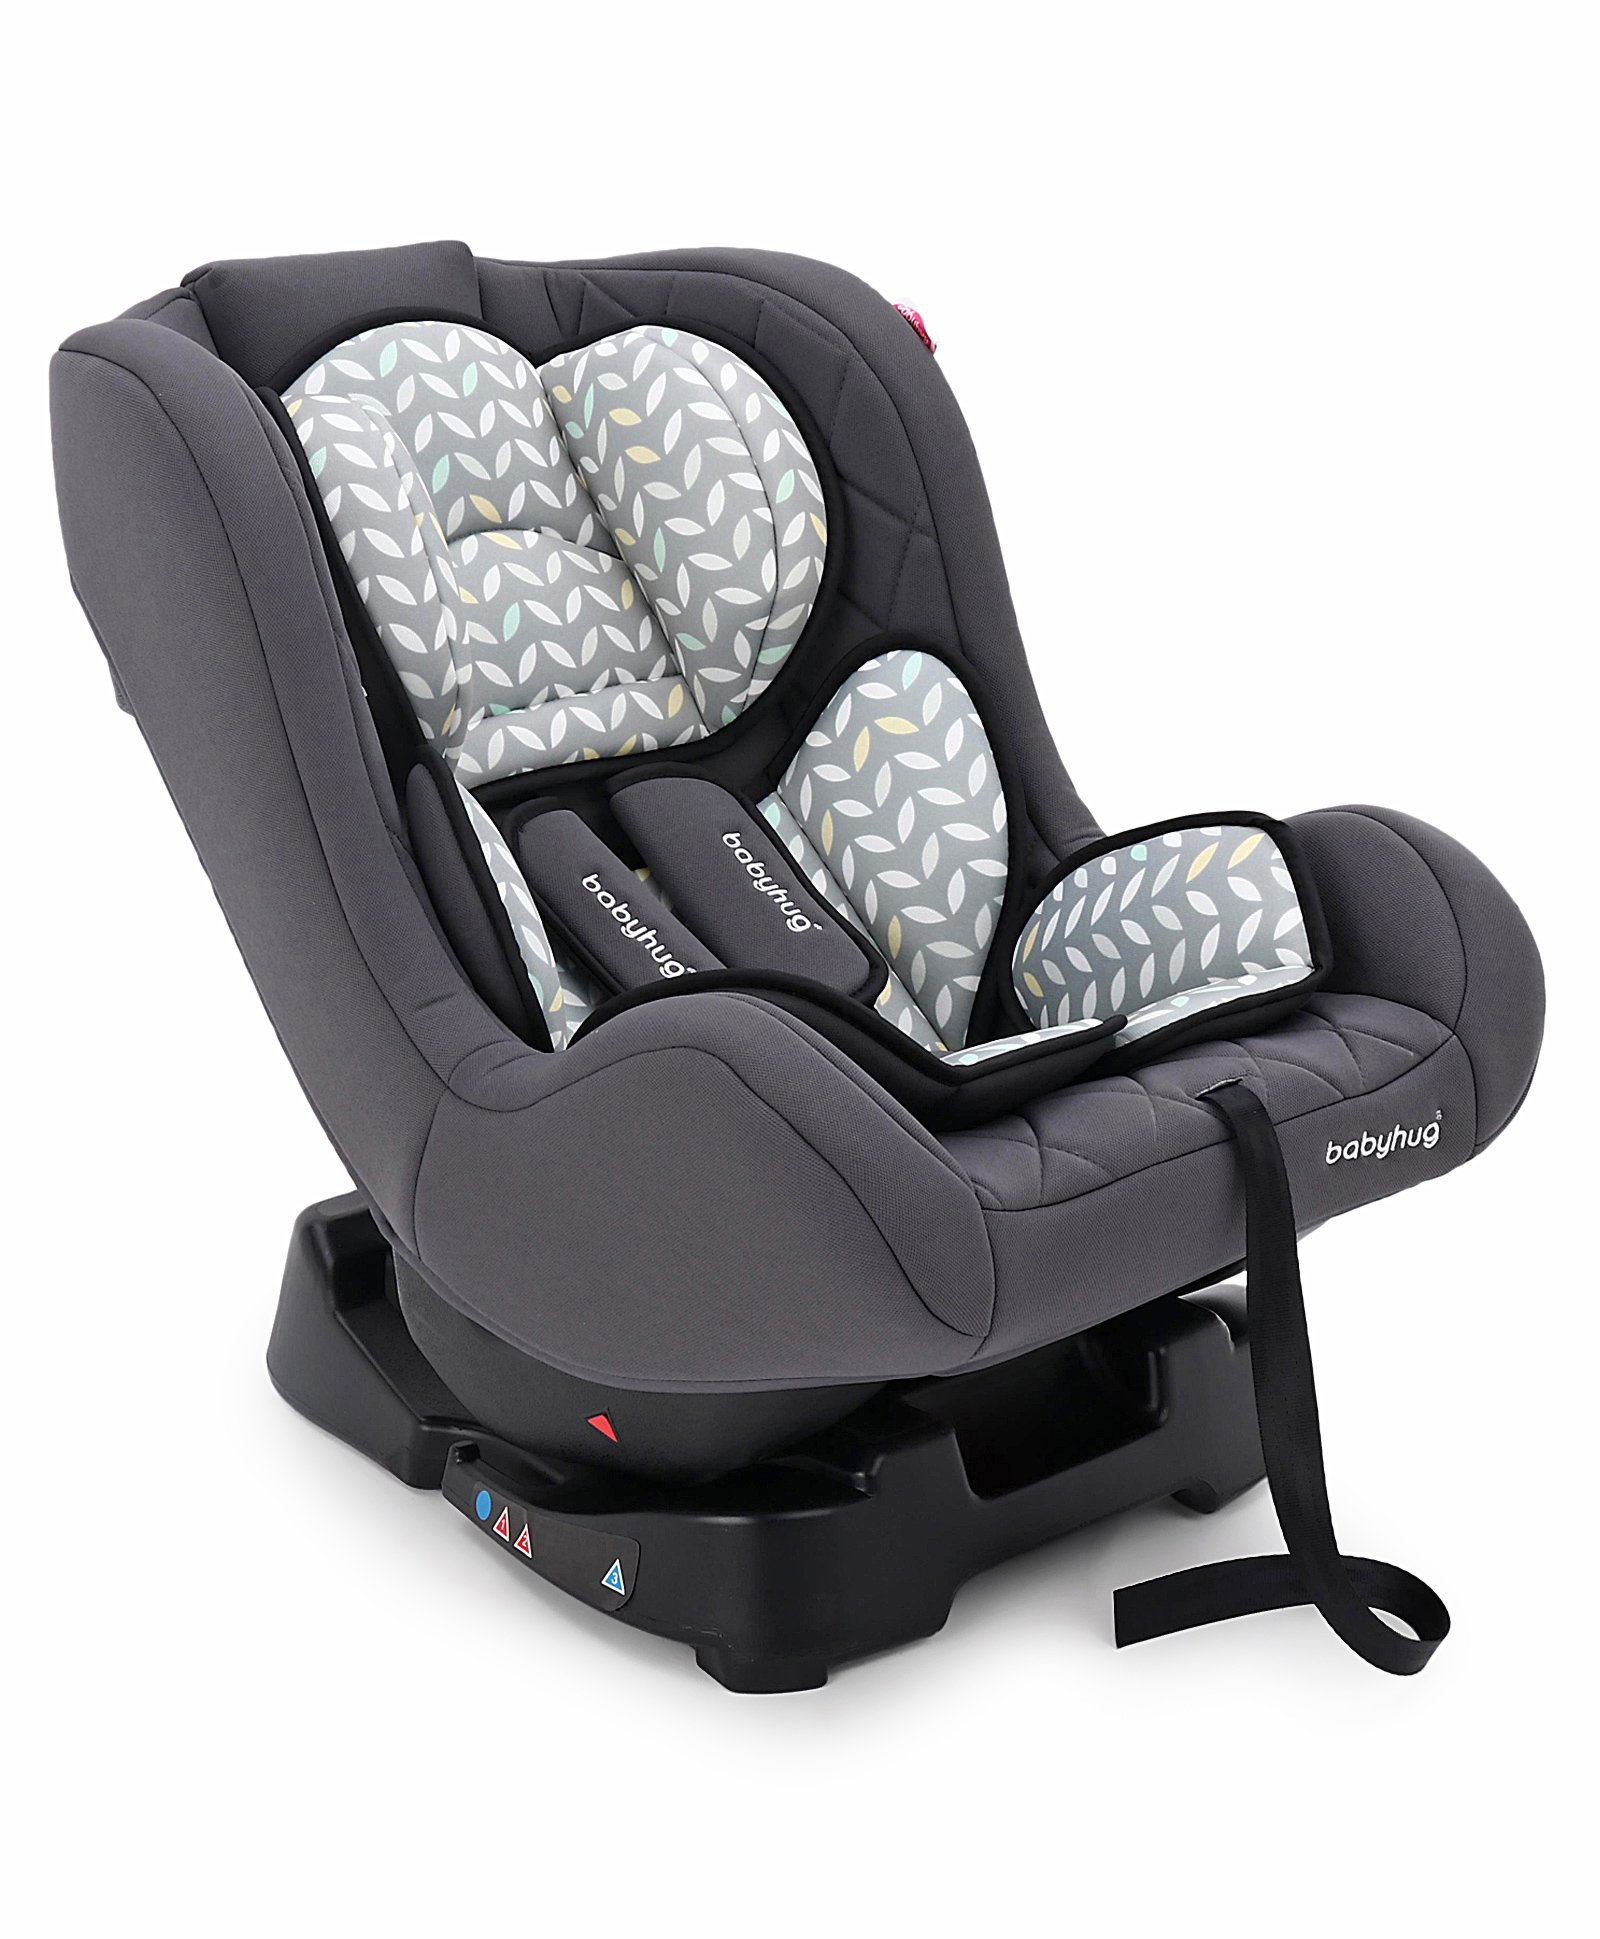 Babyhug Expedition 3 in 1 Convertible Car Seat reviews in 2023